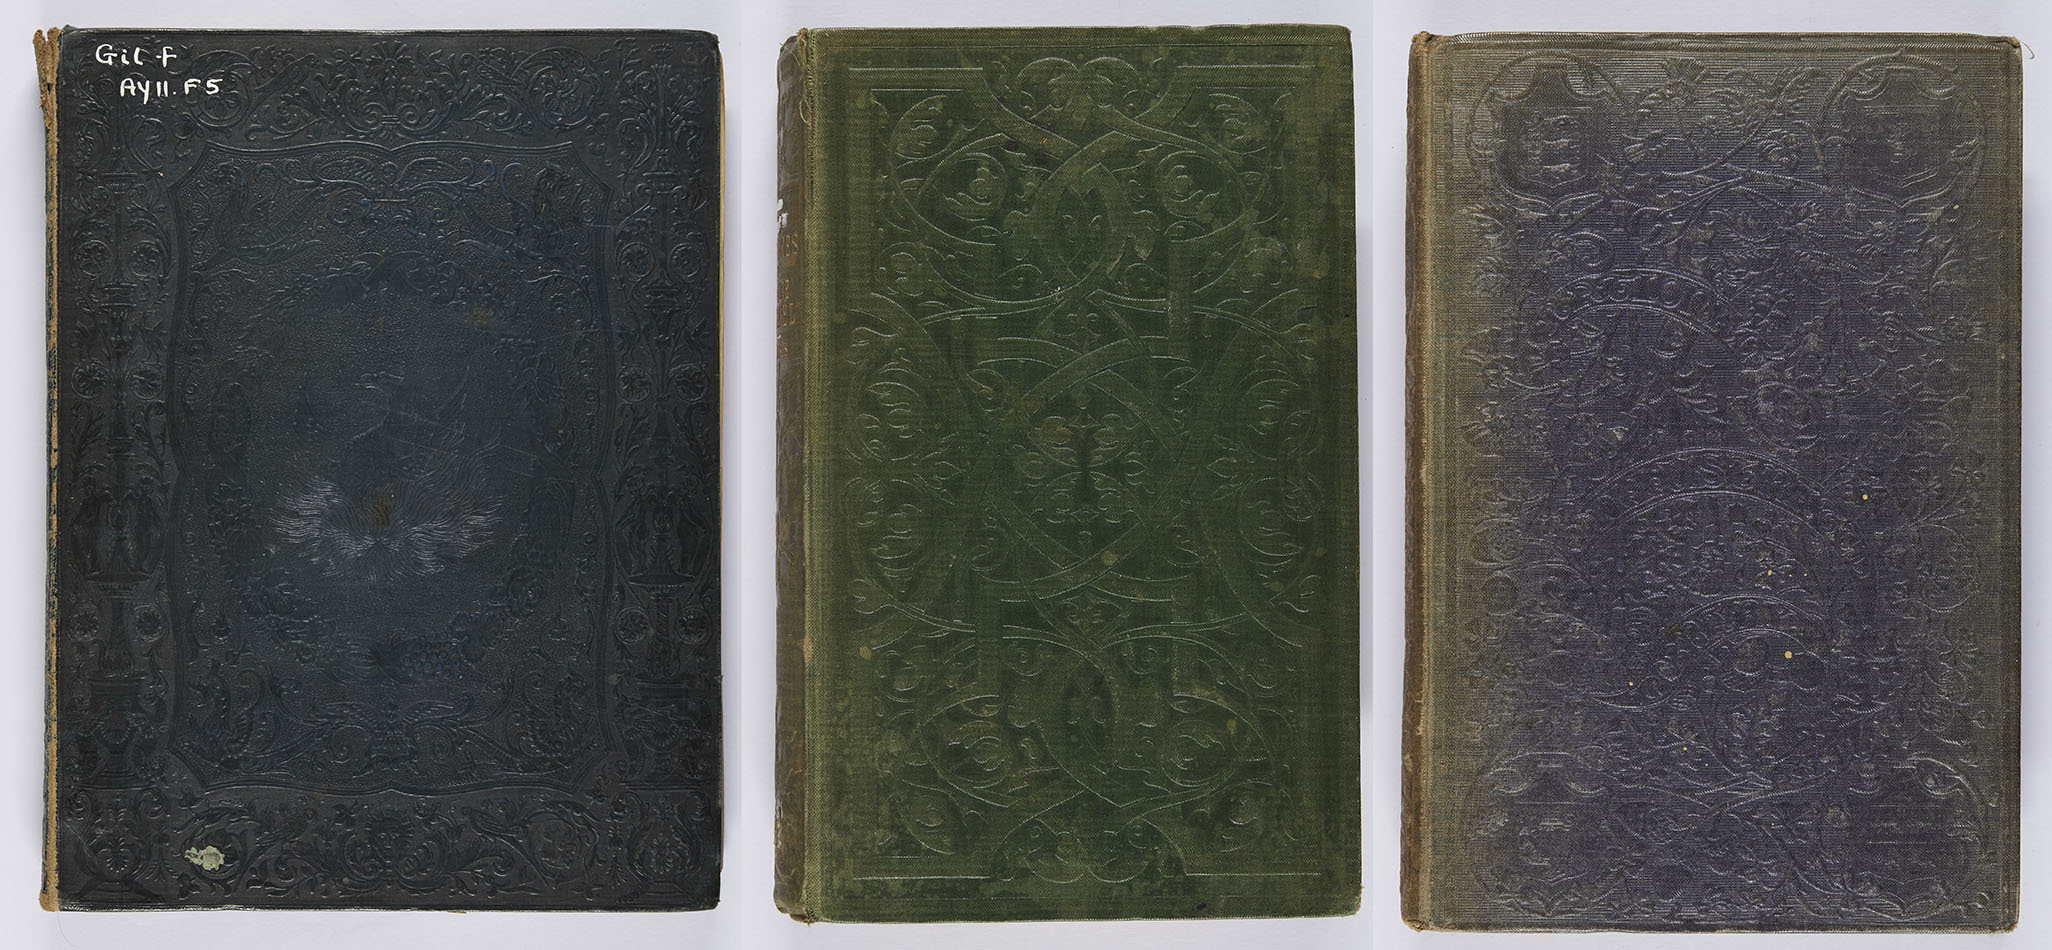 Blocked bindings made for books of a particular size, incorporating floral motifs. The third incorporates the publisher’s name, which was common when a work was part of a series. Fisher’s Drawing room scrap-book. 1835 (London: H. Fisher, R. Fisher, & P. Jackson, 1835), Gil f AY11.F5;1935 ; Maria Norris, Life and times of Madame de Stal (London: David Bogue, 1853 ; bound by Bone & Son), s PQ2431.Z5N6 ; James Boswell, The journal of a tour to the Hebrides with Samuel Johnson, LL.D (London, Office of the National Illustrated Library, [1852]), Fle DA880.H4E52. 